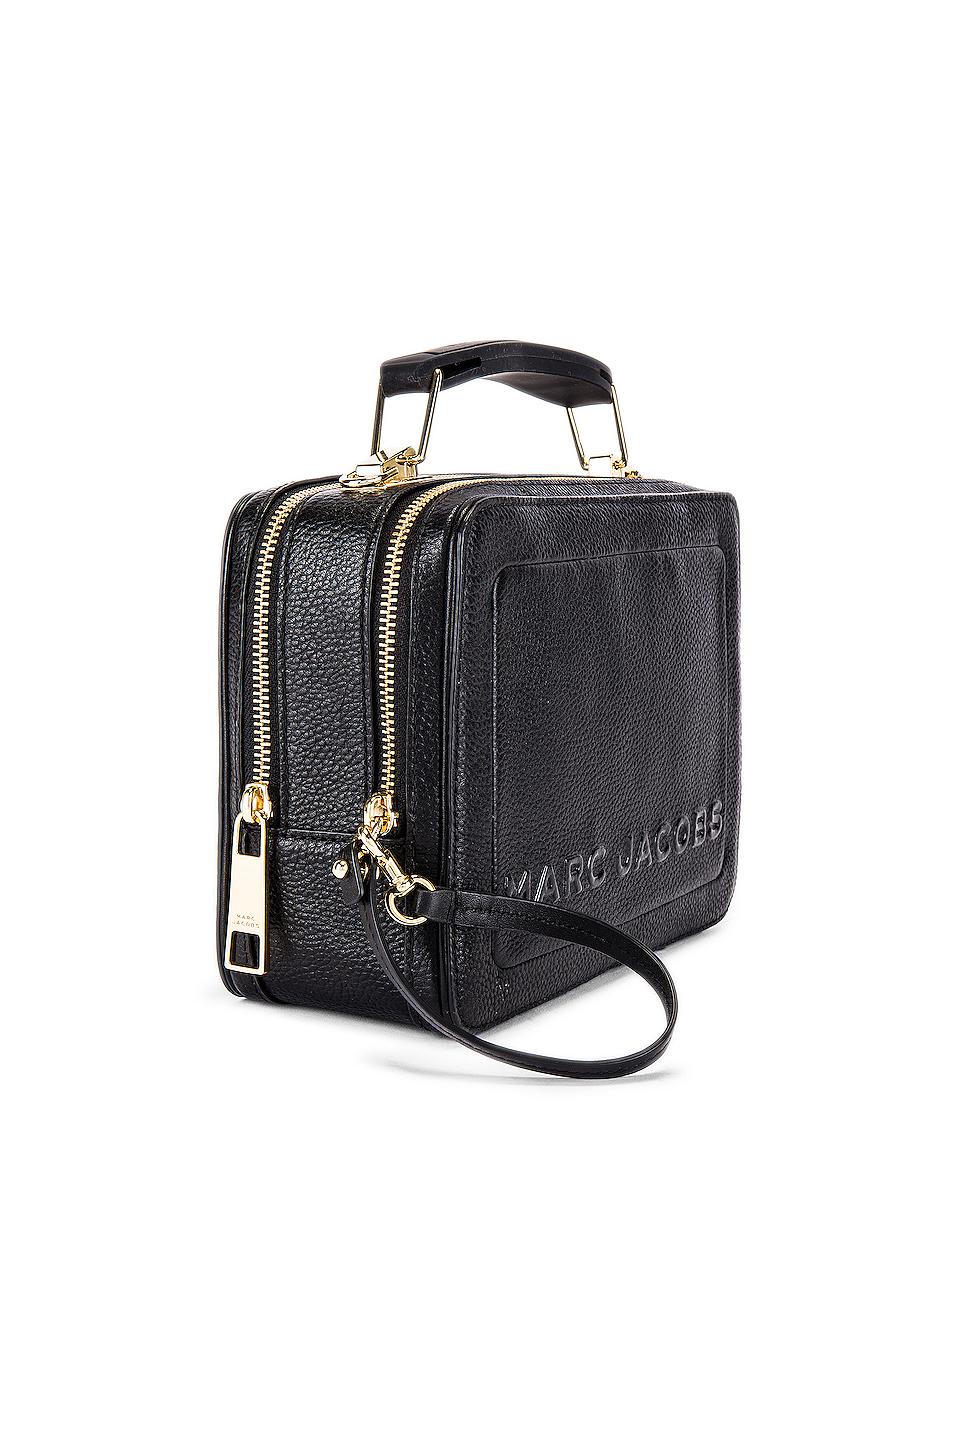 Marc Jacobs The Box 23 Leather Top Handle Bag in Black - Lyst